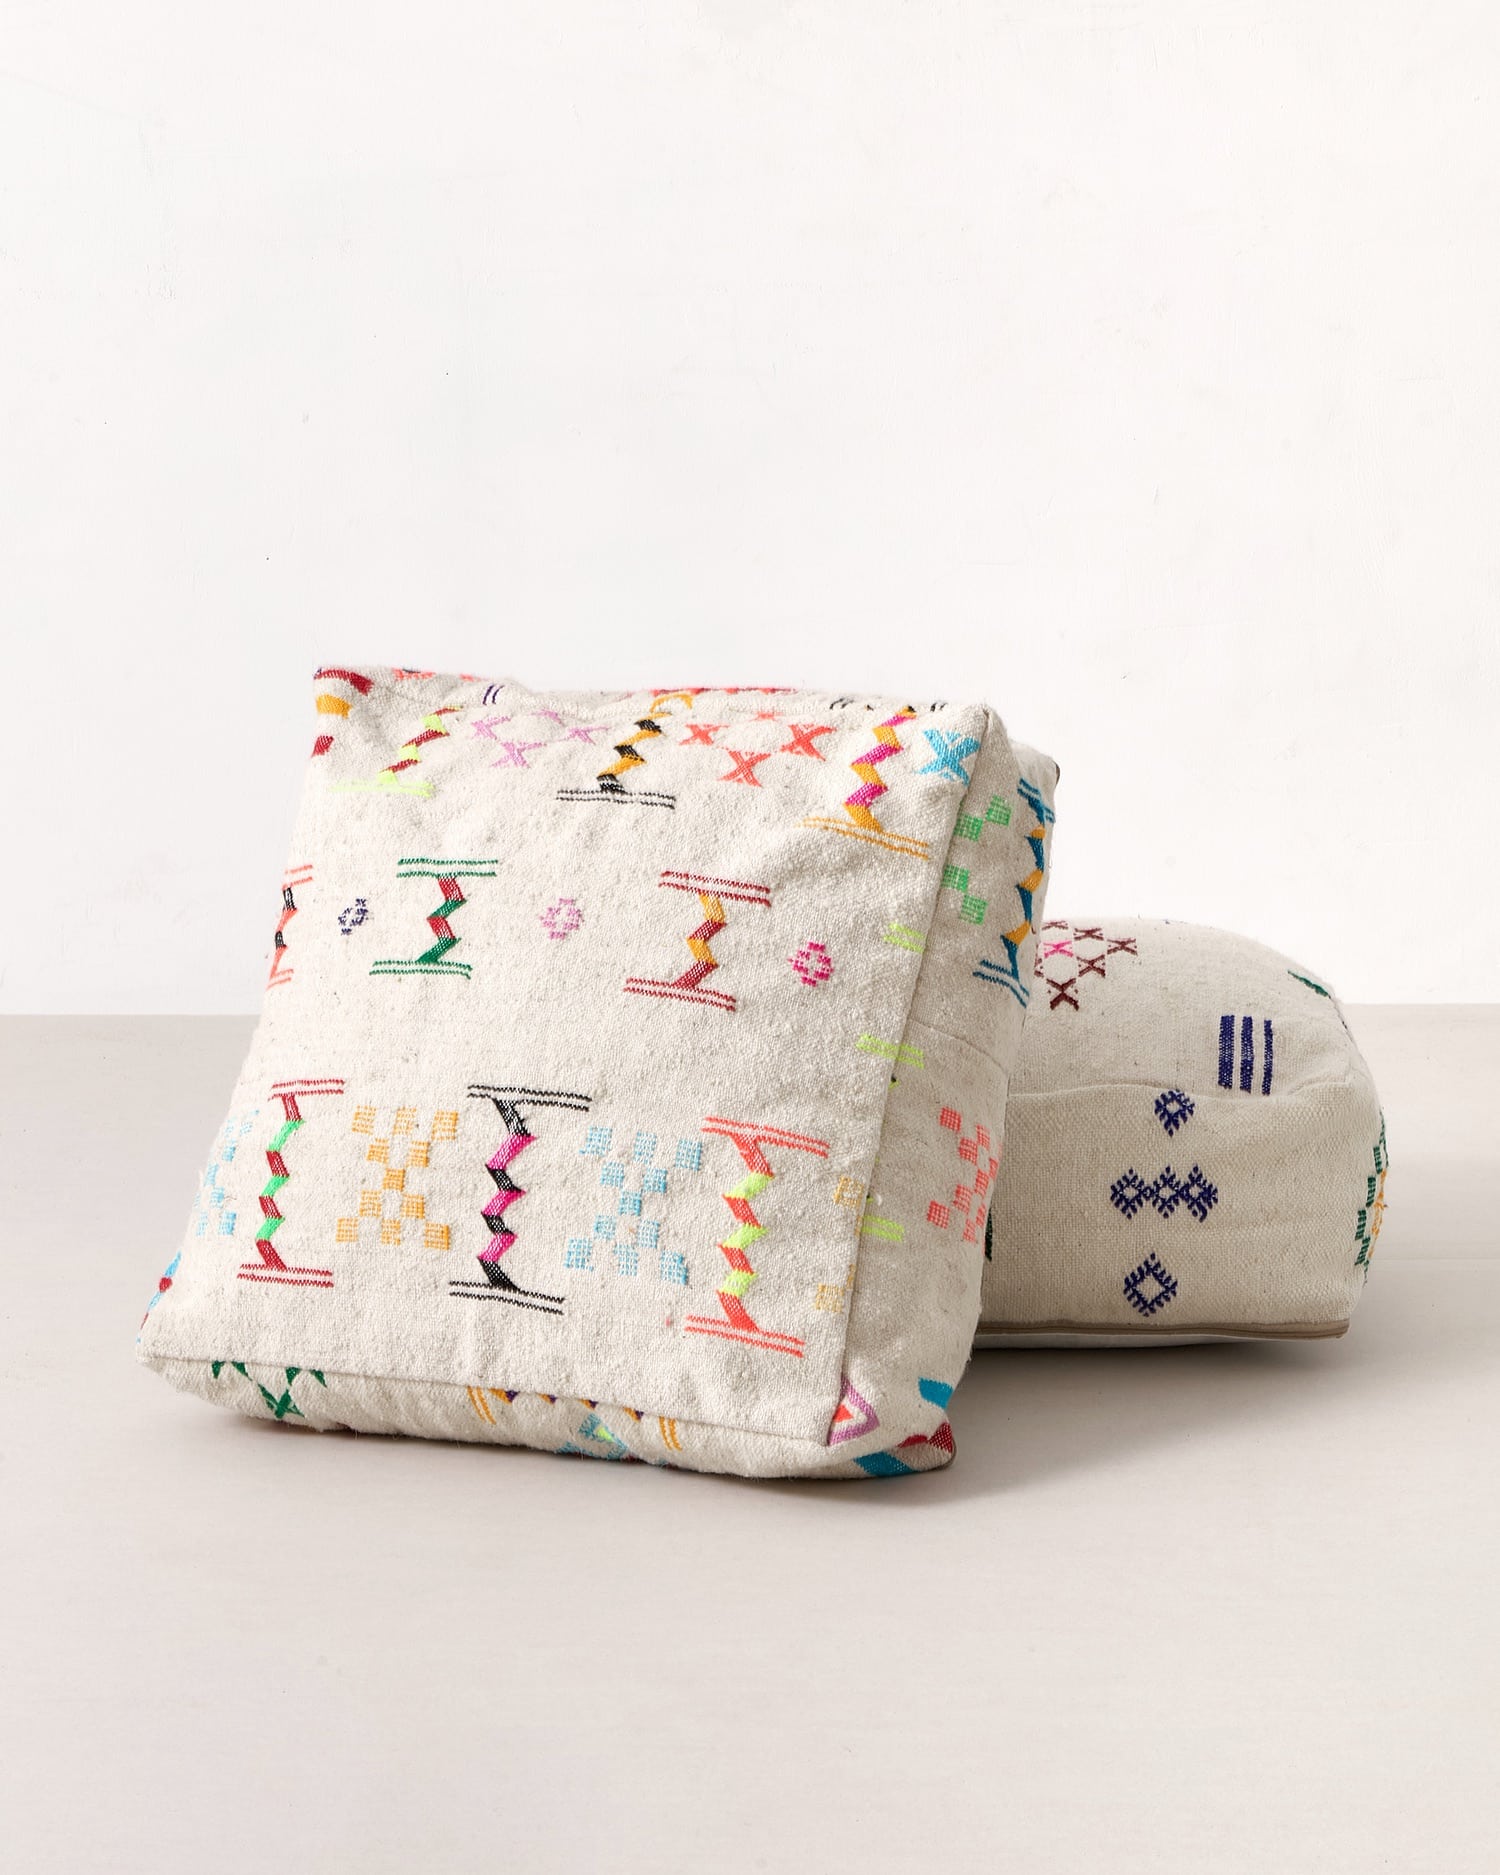 Flatwoven pouf with colourful pictograms